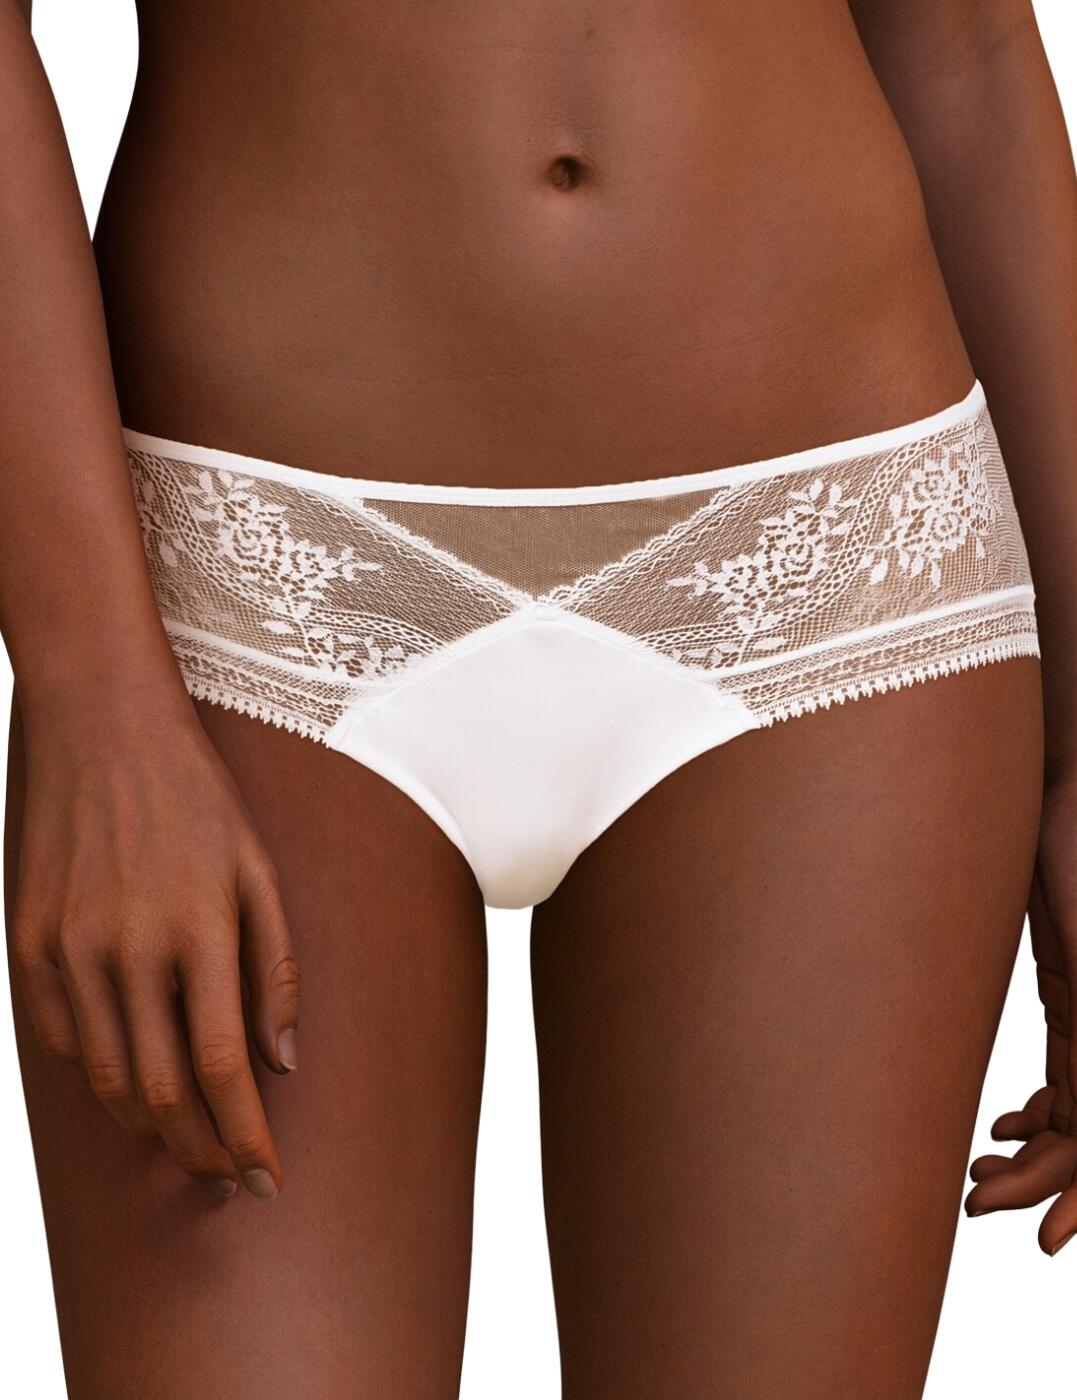 Passionata by Chantelle Maddie Shorty Brief White